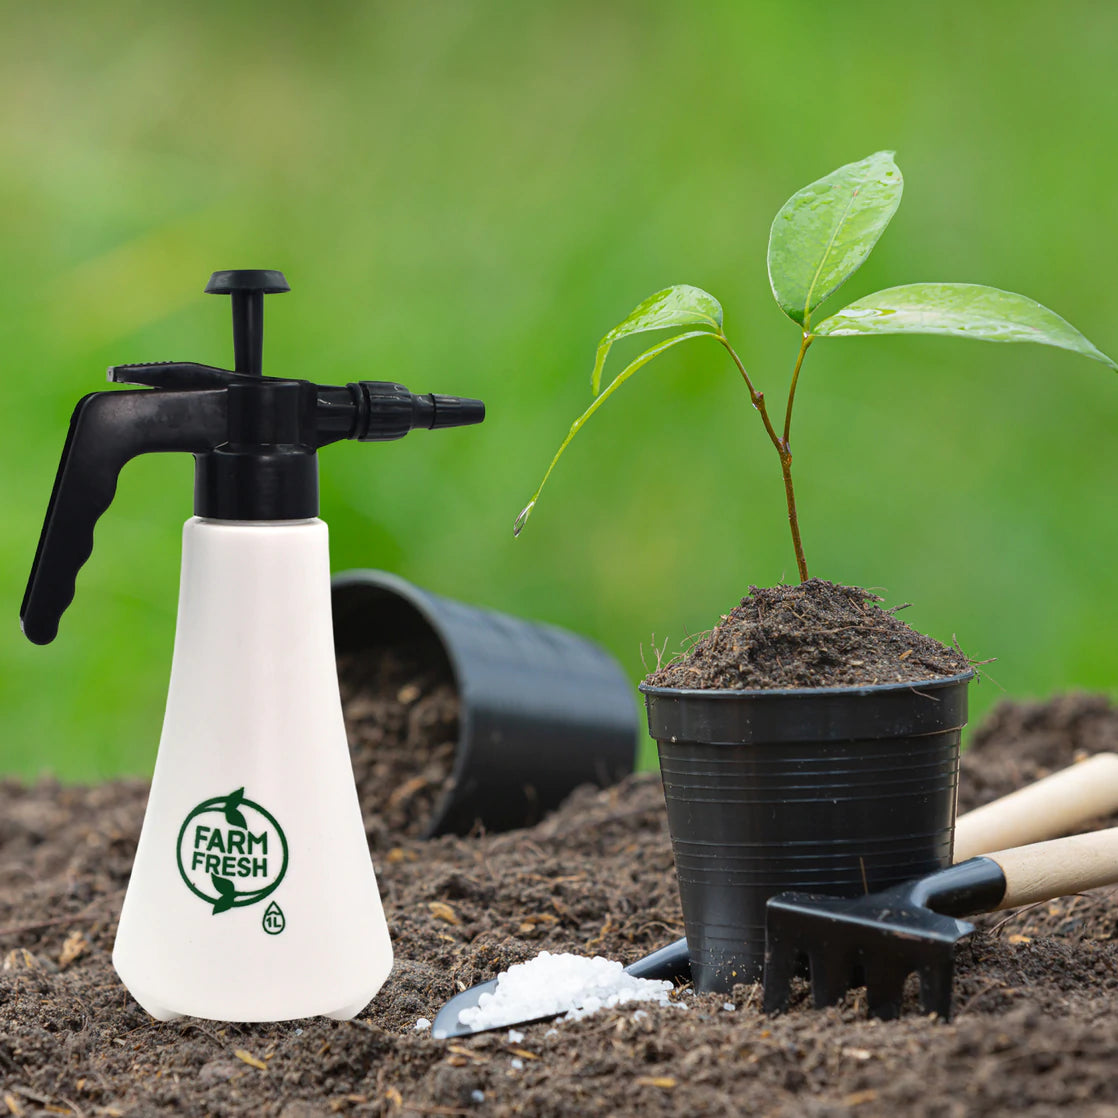 1 LITRE GARDEN SPRAYER USED IN ALL KINDS OF GARDEN AND PARK FOR SPRINKLING AND SHOWERING PURPOSES.